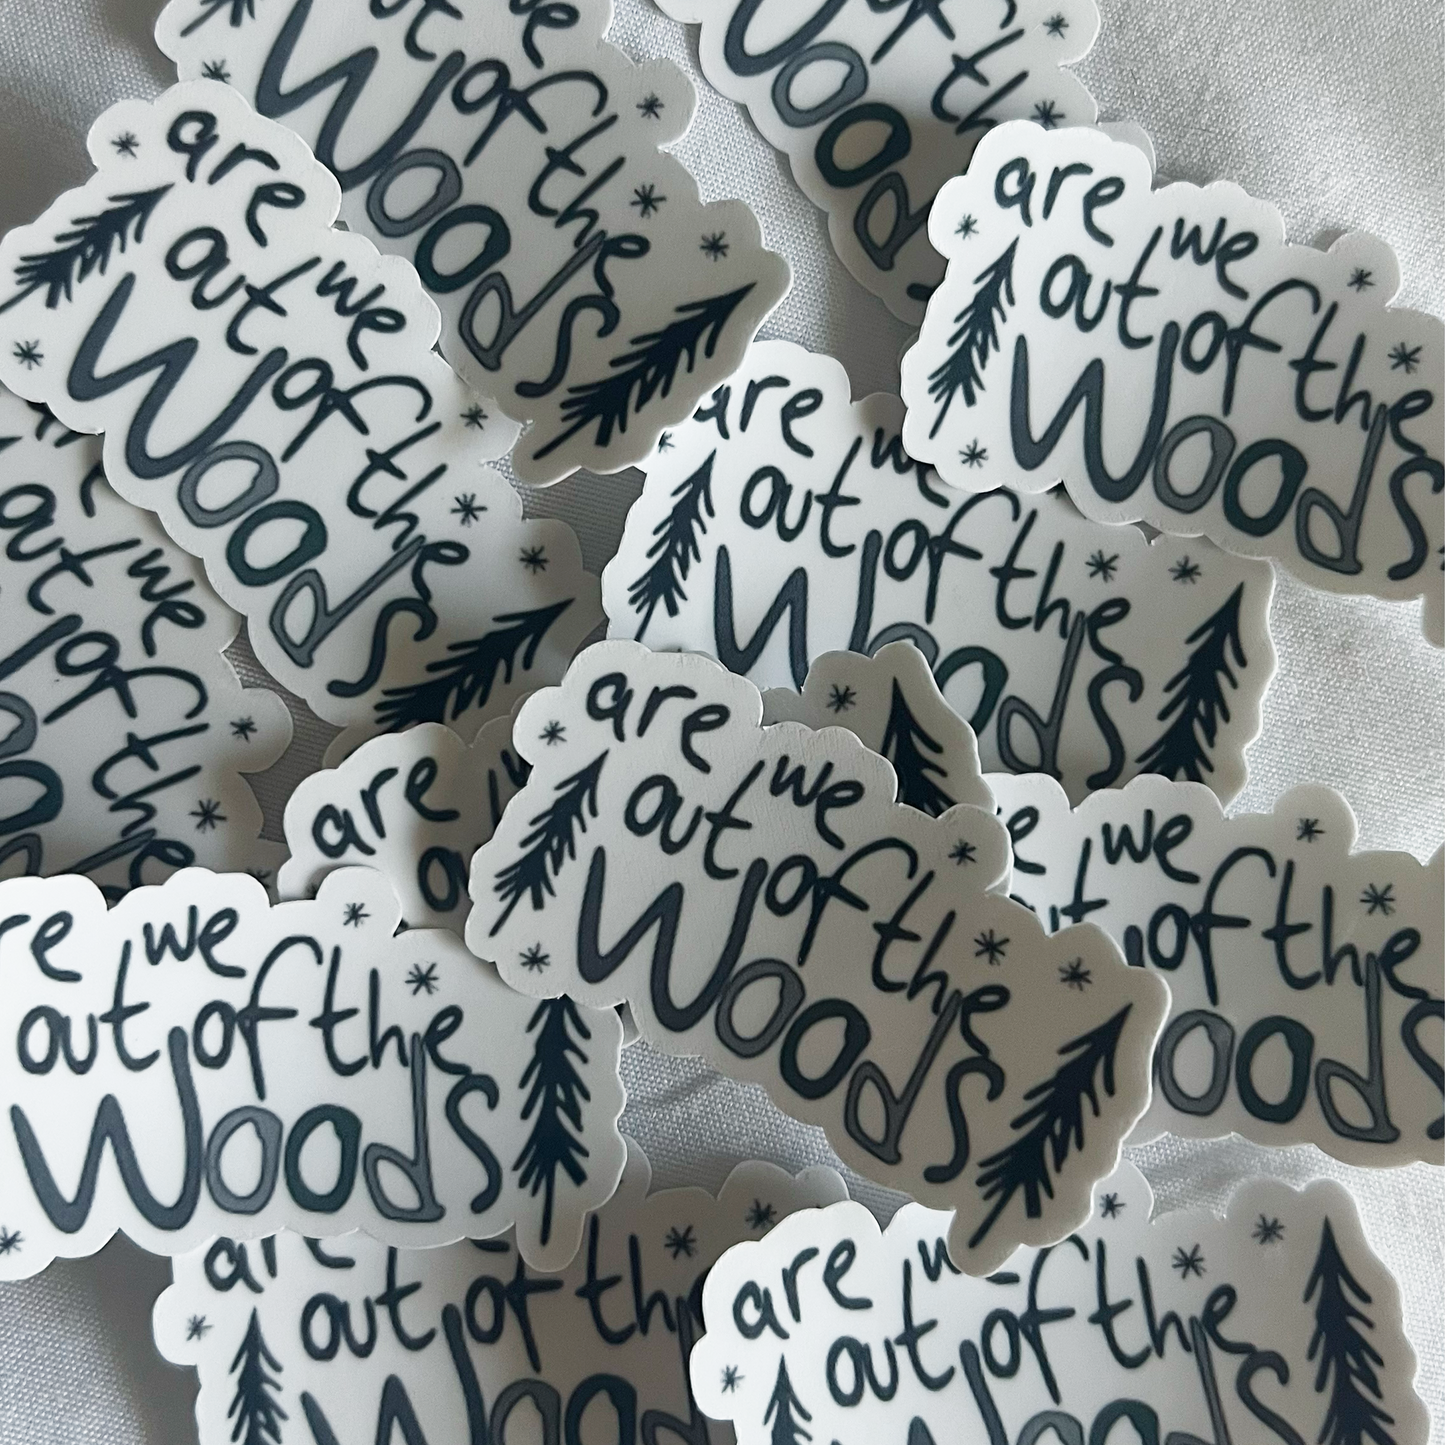 Out Of The Woods Taylor Swift Sticker